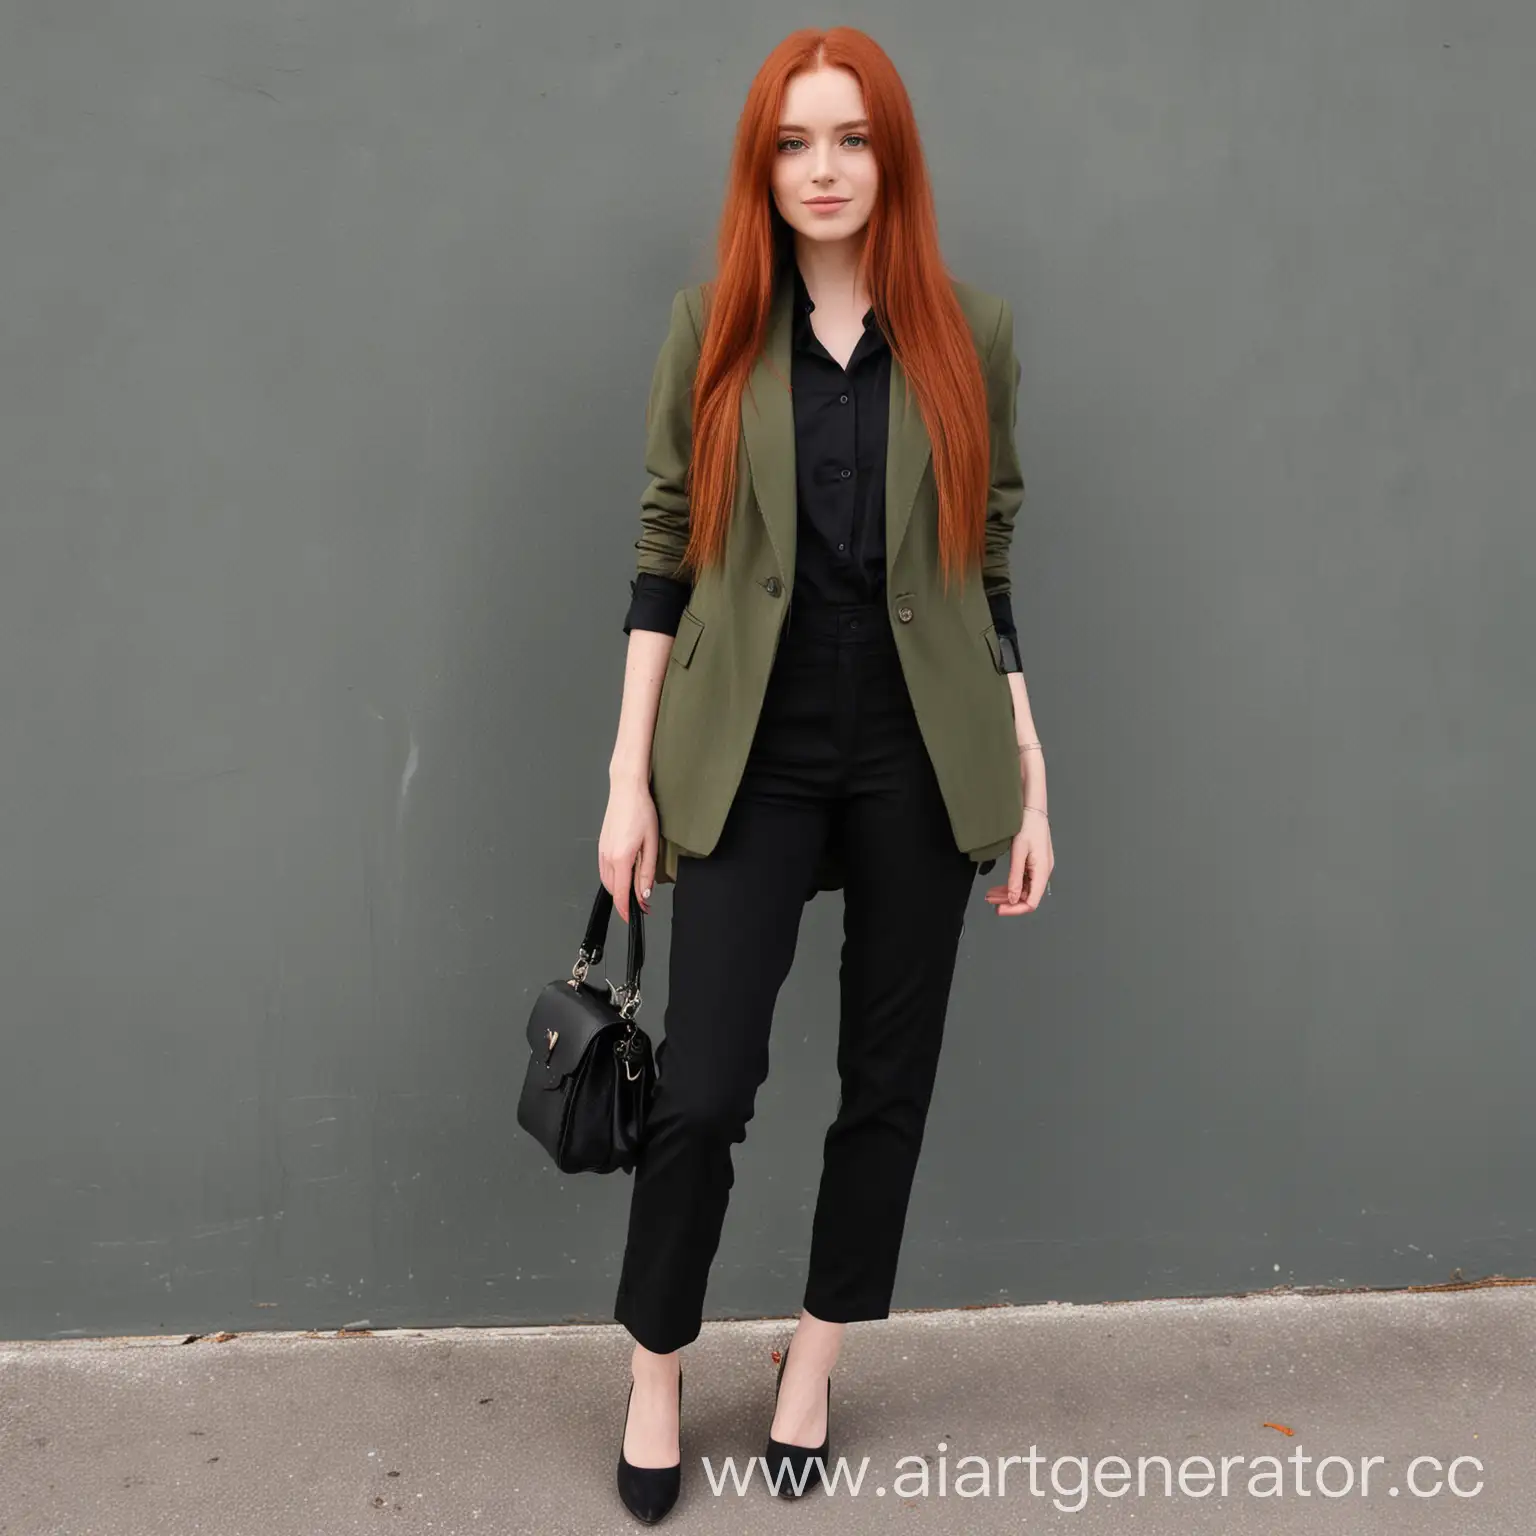 Girl-with-Red-Long-Hair-in-Classic-Black-Vest-and-Blazer